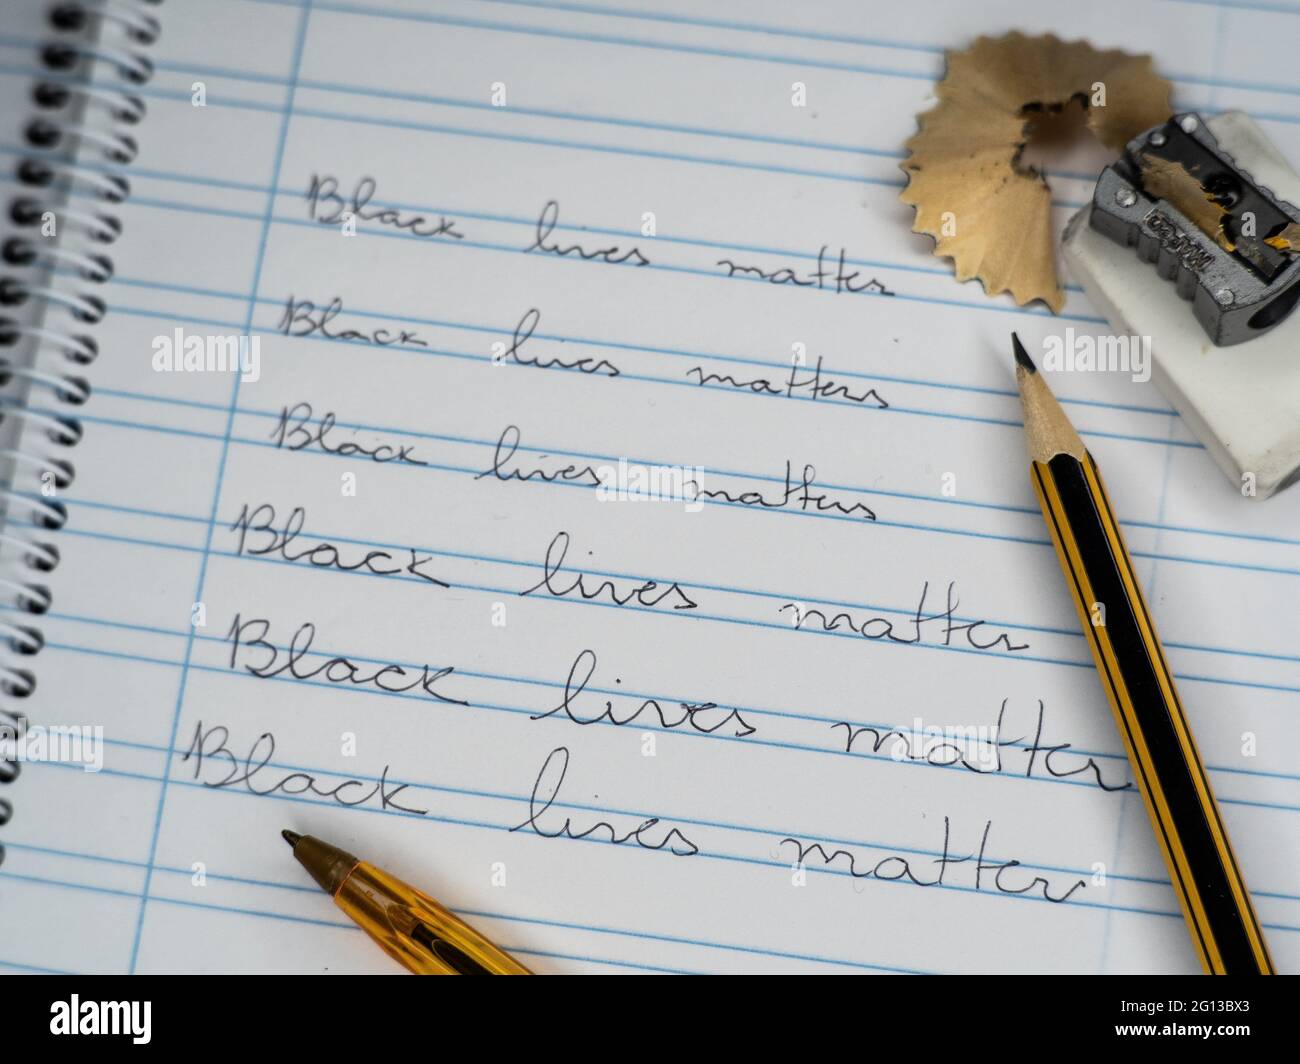 A calligraphic school notebook with pencil, rubber, pencil sharpener and pens show the slogan Black LIves Matter. Stock Photo